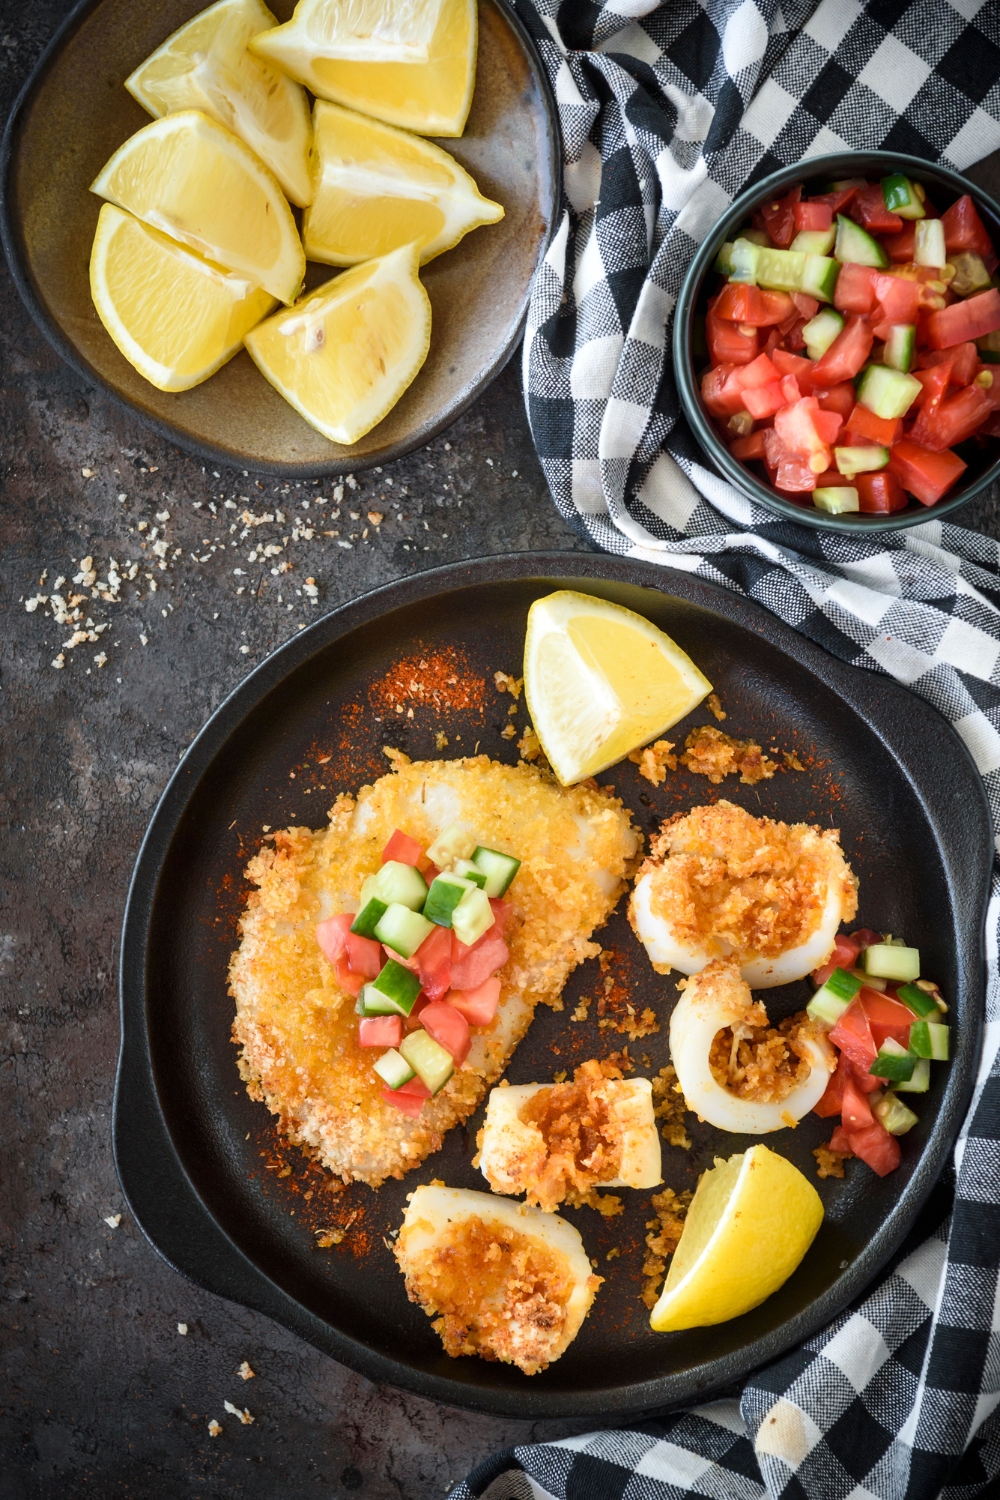 A breaded calamari steak topped with cucumber and diced tomato on a plate with a lemon wedge and chunks of sliced calamari.